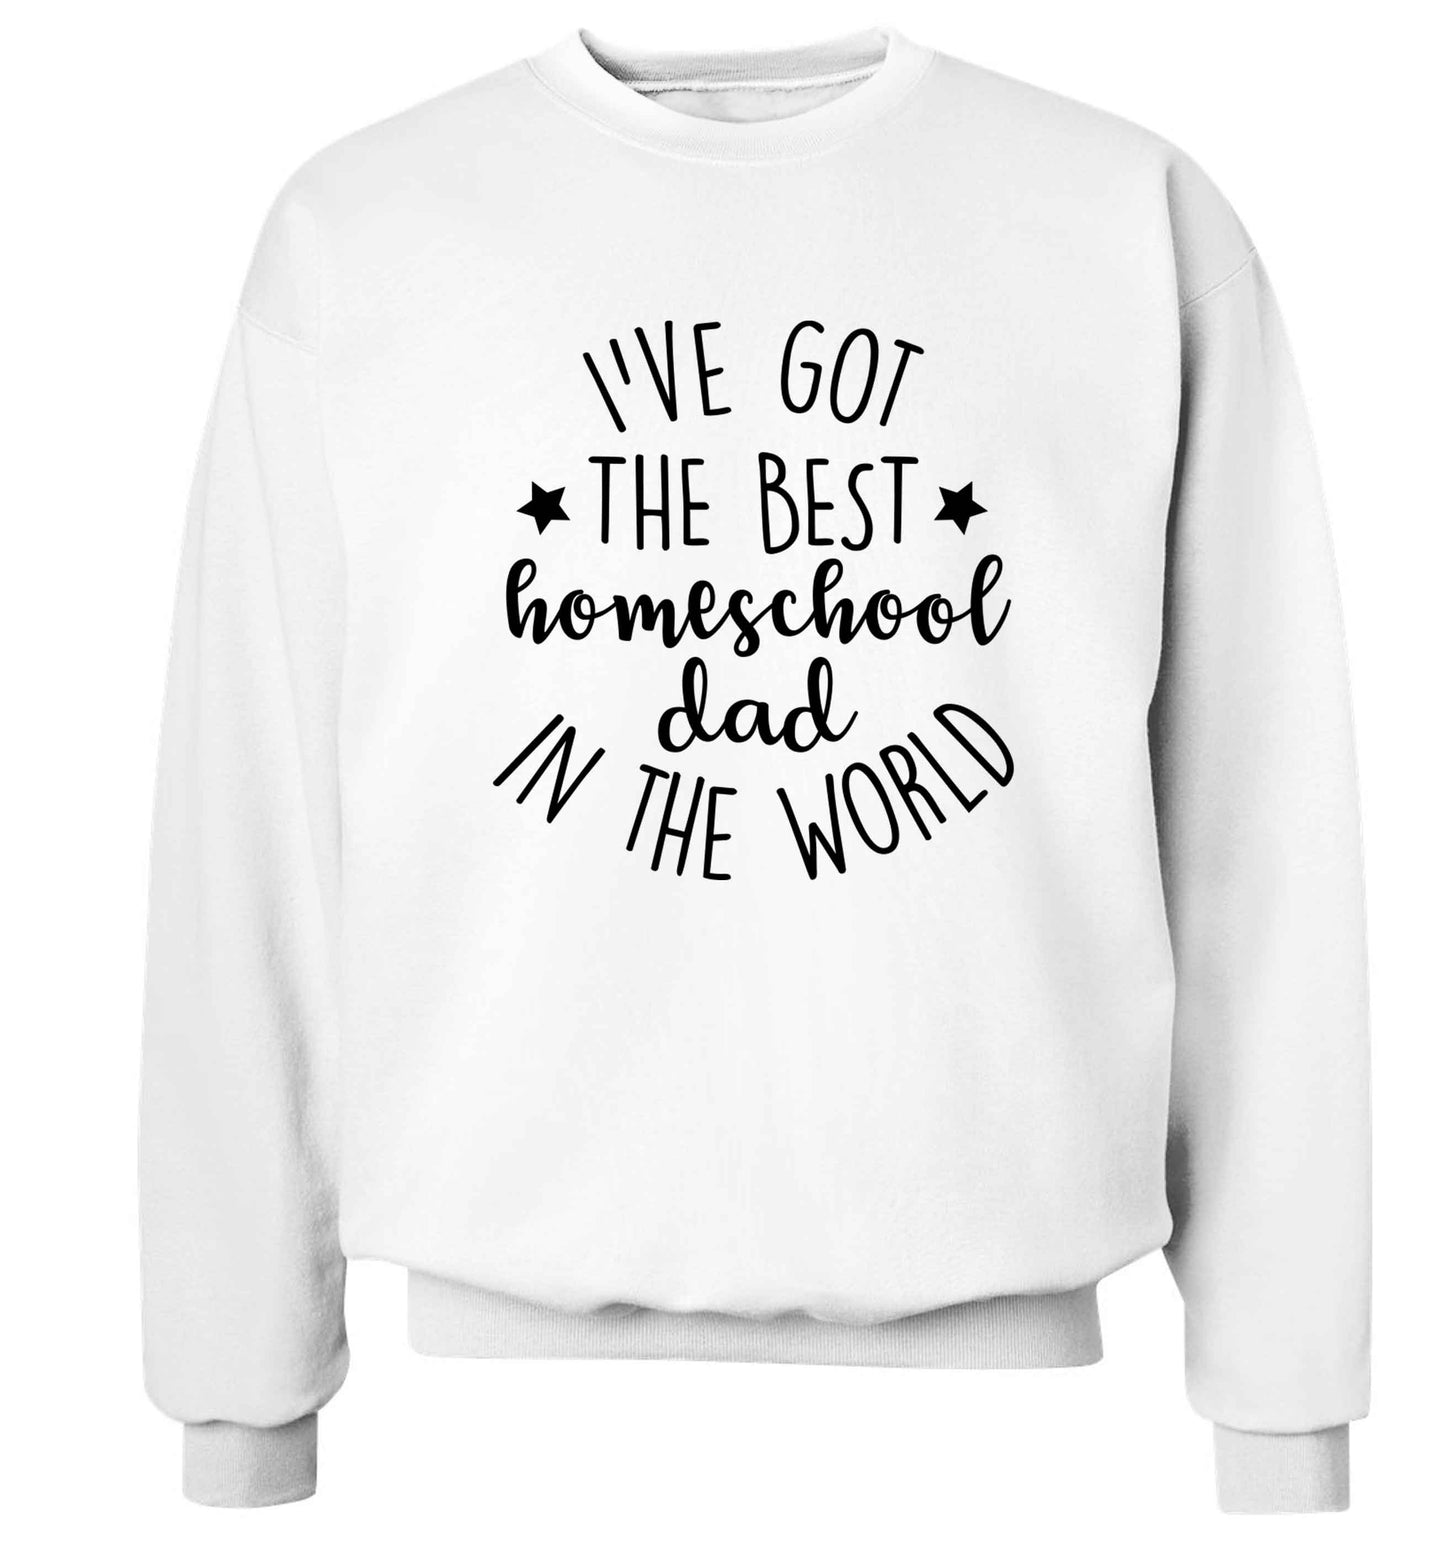 I've got the best homeschool dad in the world Adult's unisex white Sweater 2XL